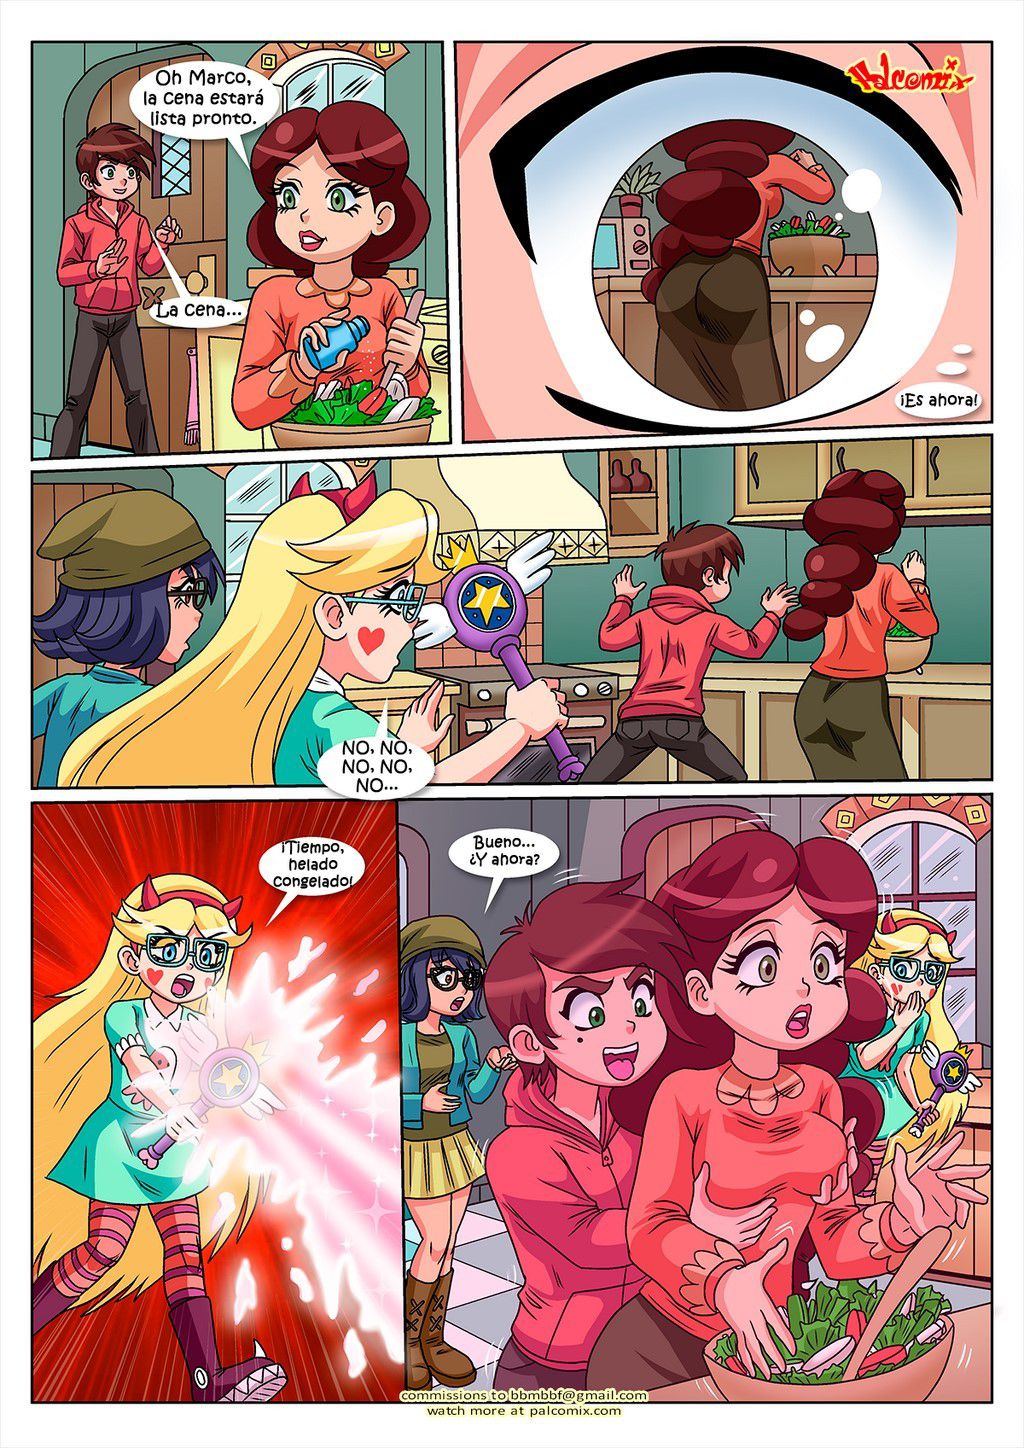 [Palcomix] Amante Latino (Star vs. the Forces of Evil) [Spanish] 20